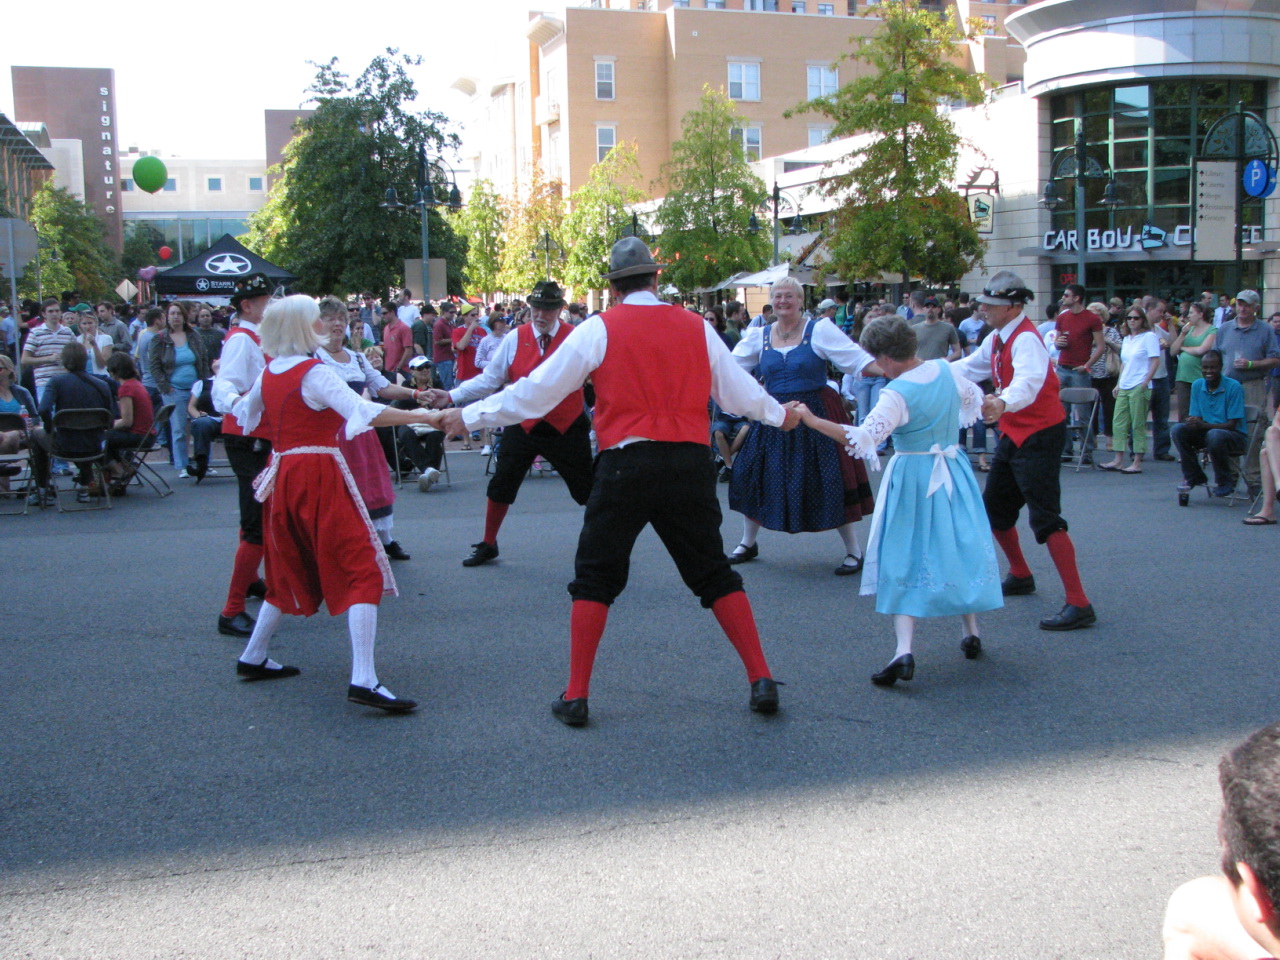 many people in costume dancing on the street